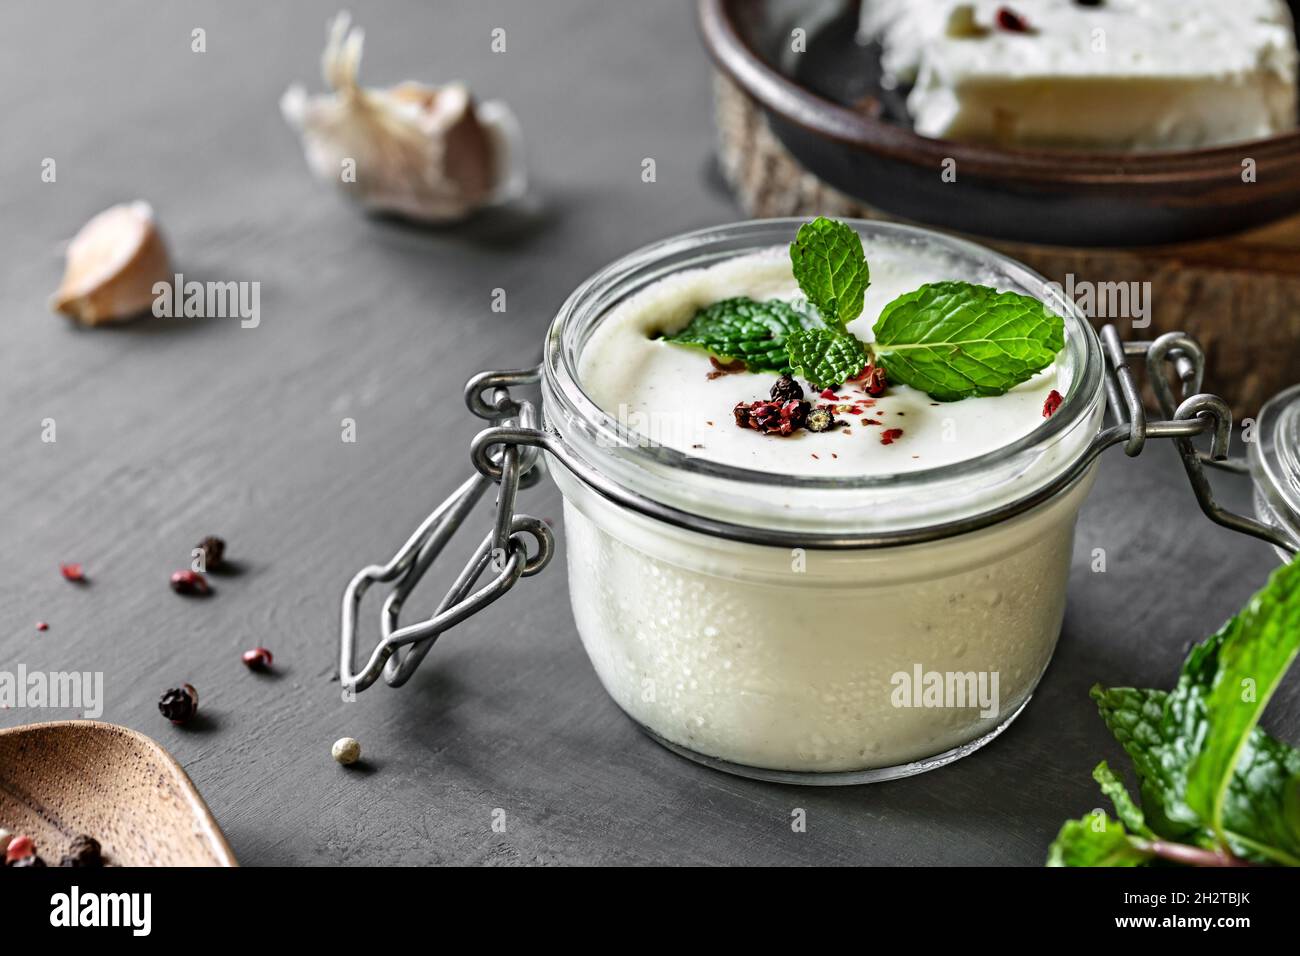 Homemade Feta cheese dip with Herbs and Spices Stock Photo